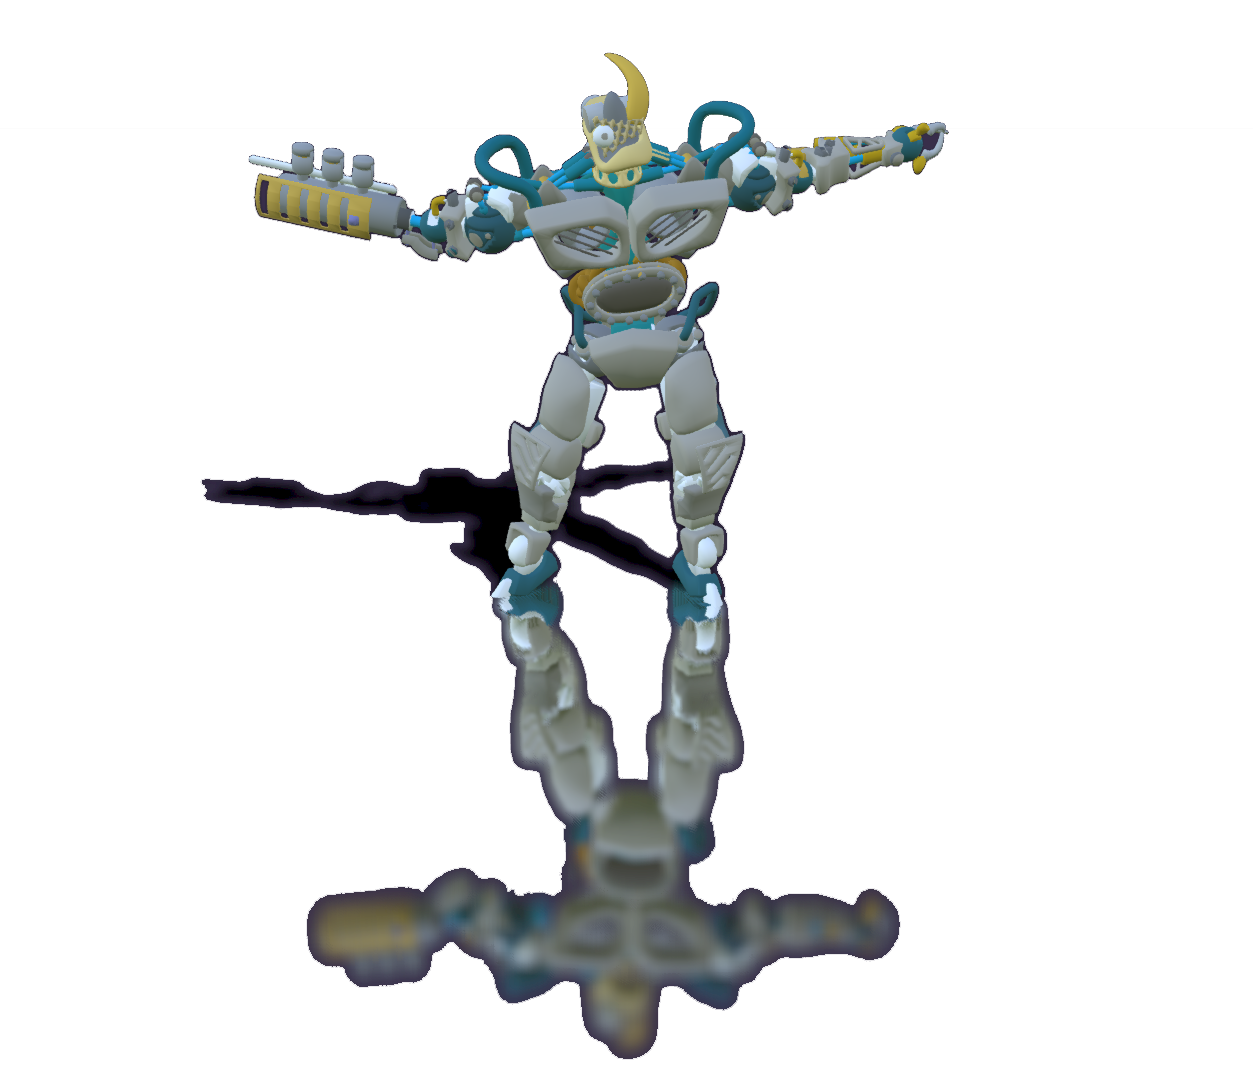 A robot posing with arms outstretched on a smooth surface which is reflecting the image of the robot.